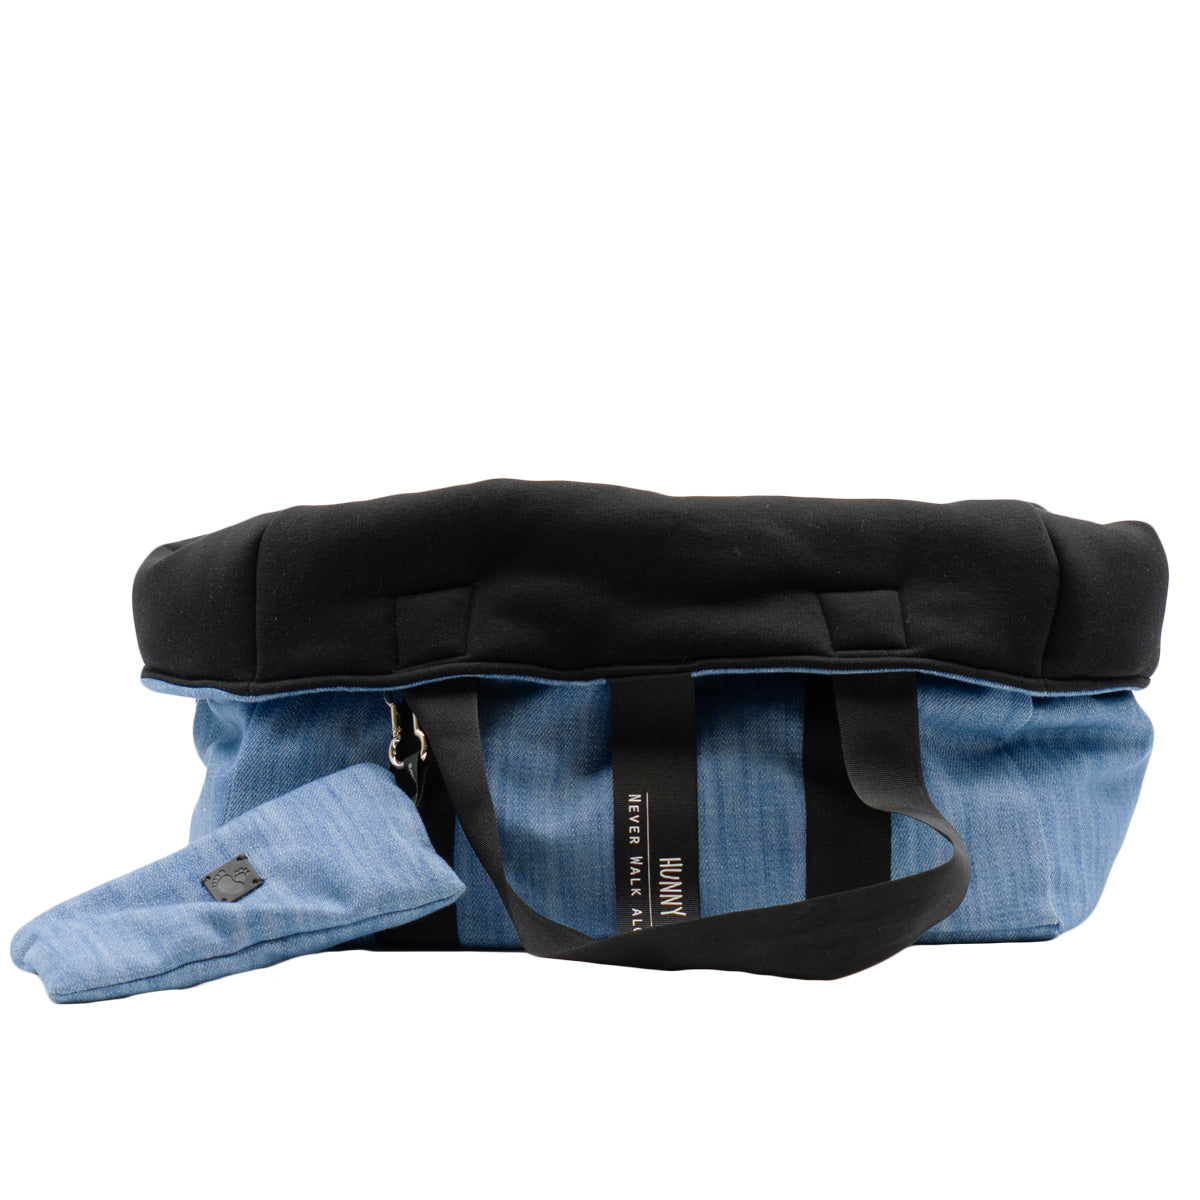 Dog kennel bag | Jeans and inner sweatshirt | Dandy's Store